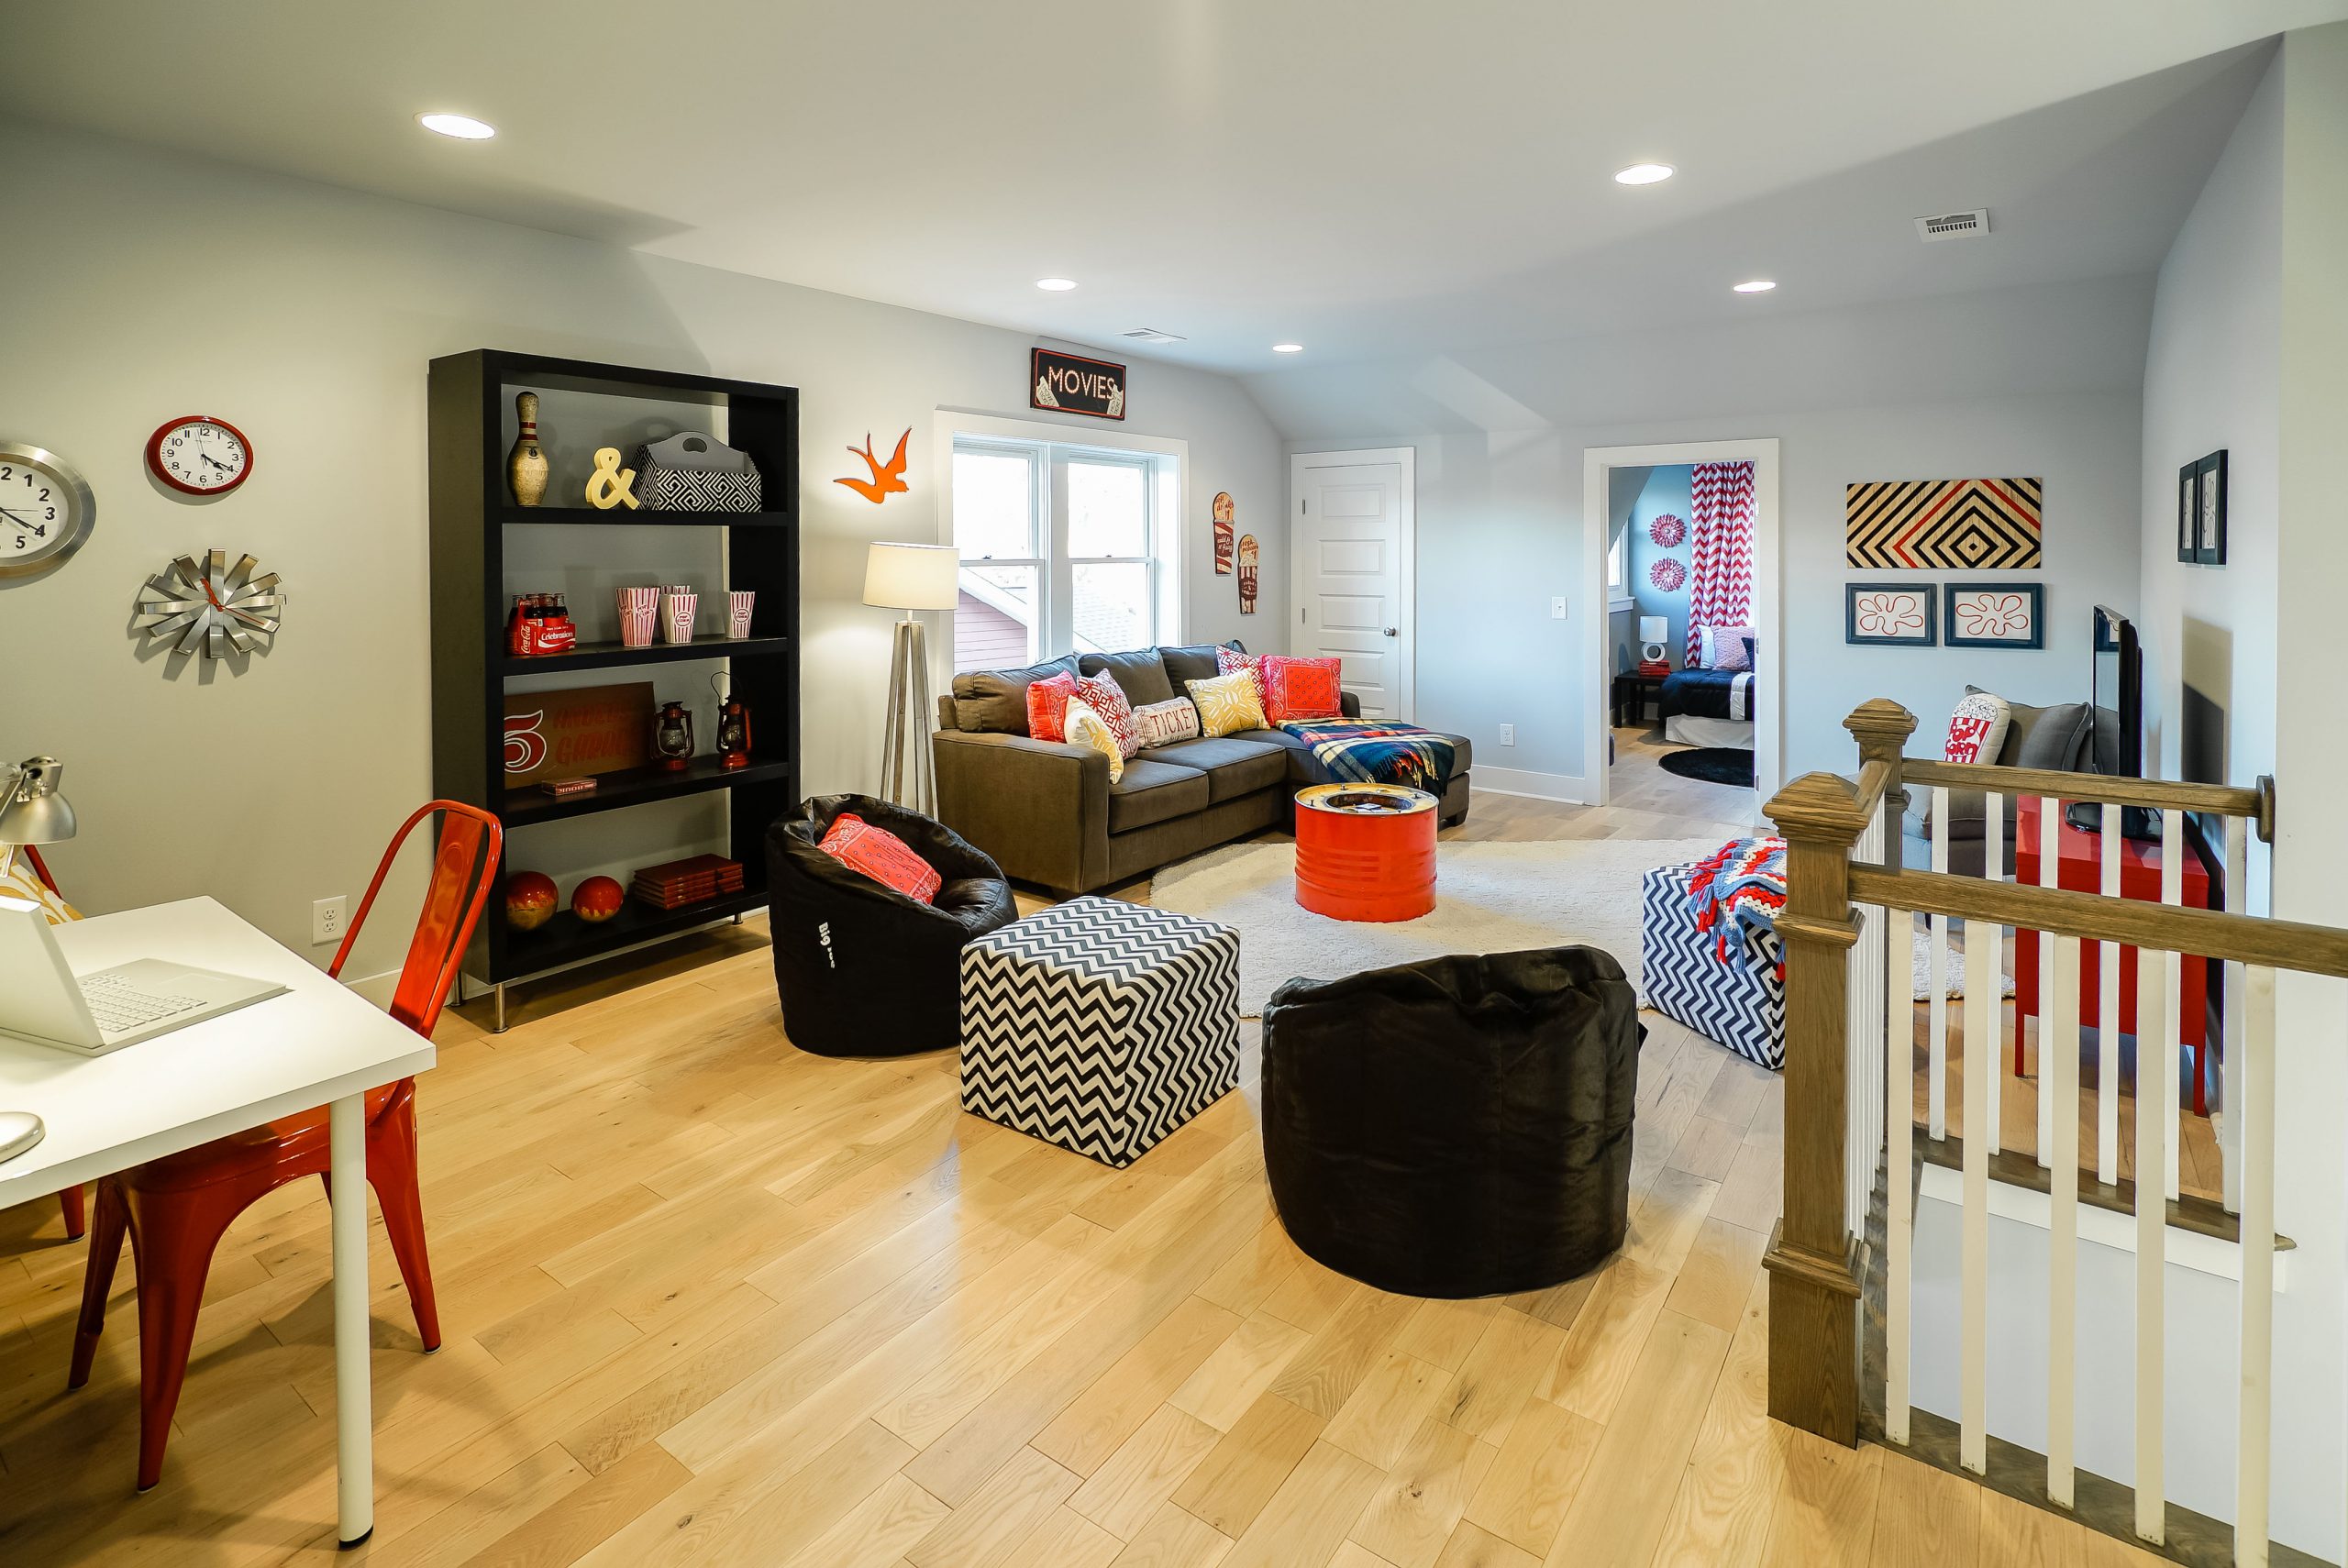 Kortney Wilson creates a modern-meets-vintage duplex with hits of red